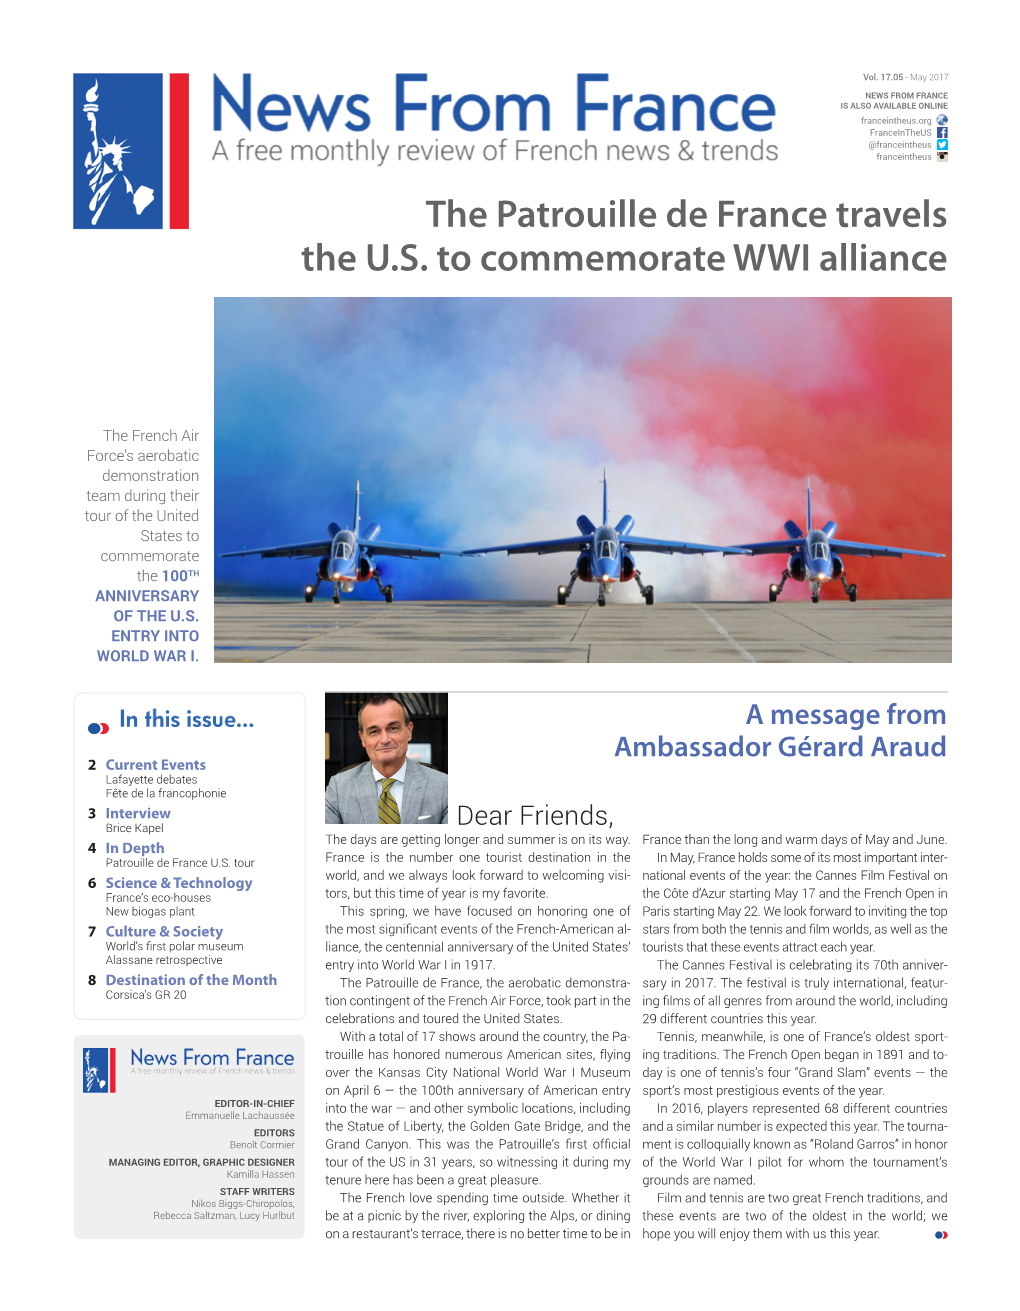 The Patrouille De France Travels the U.S. to Commemorate WWI Alliance